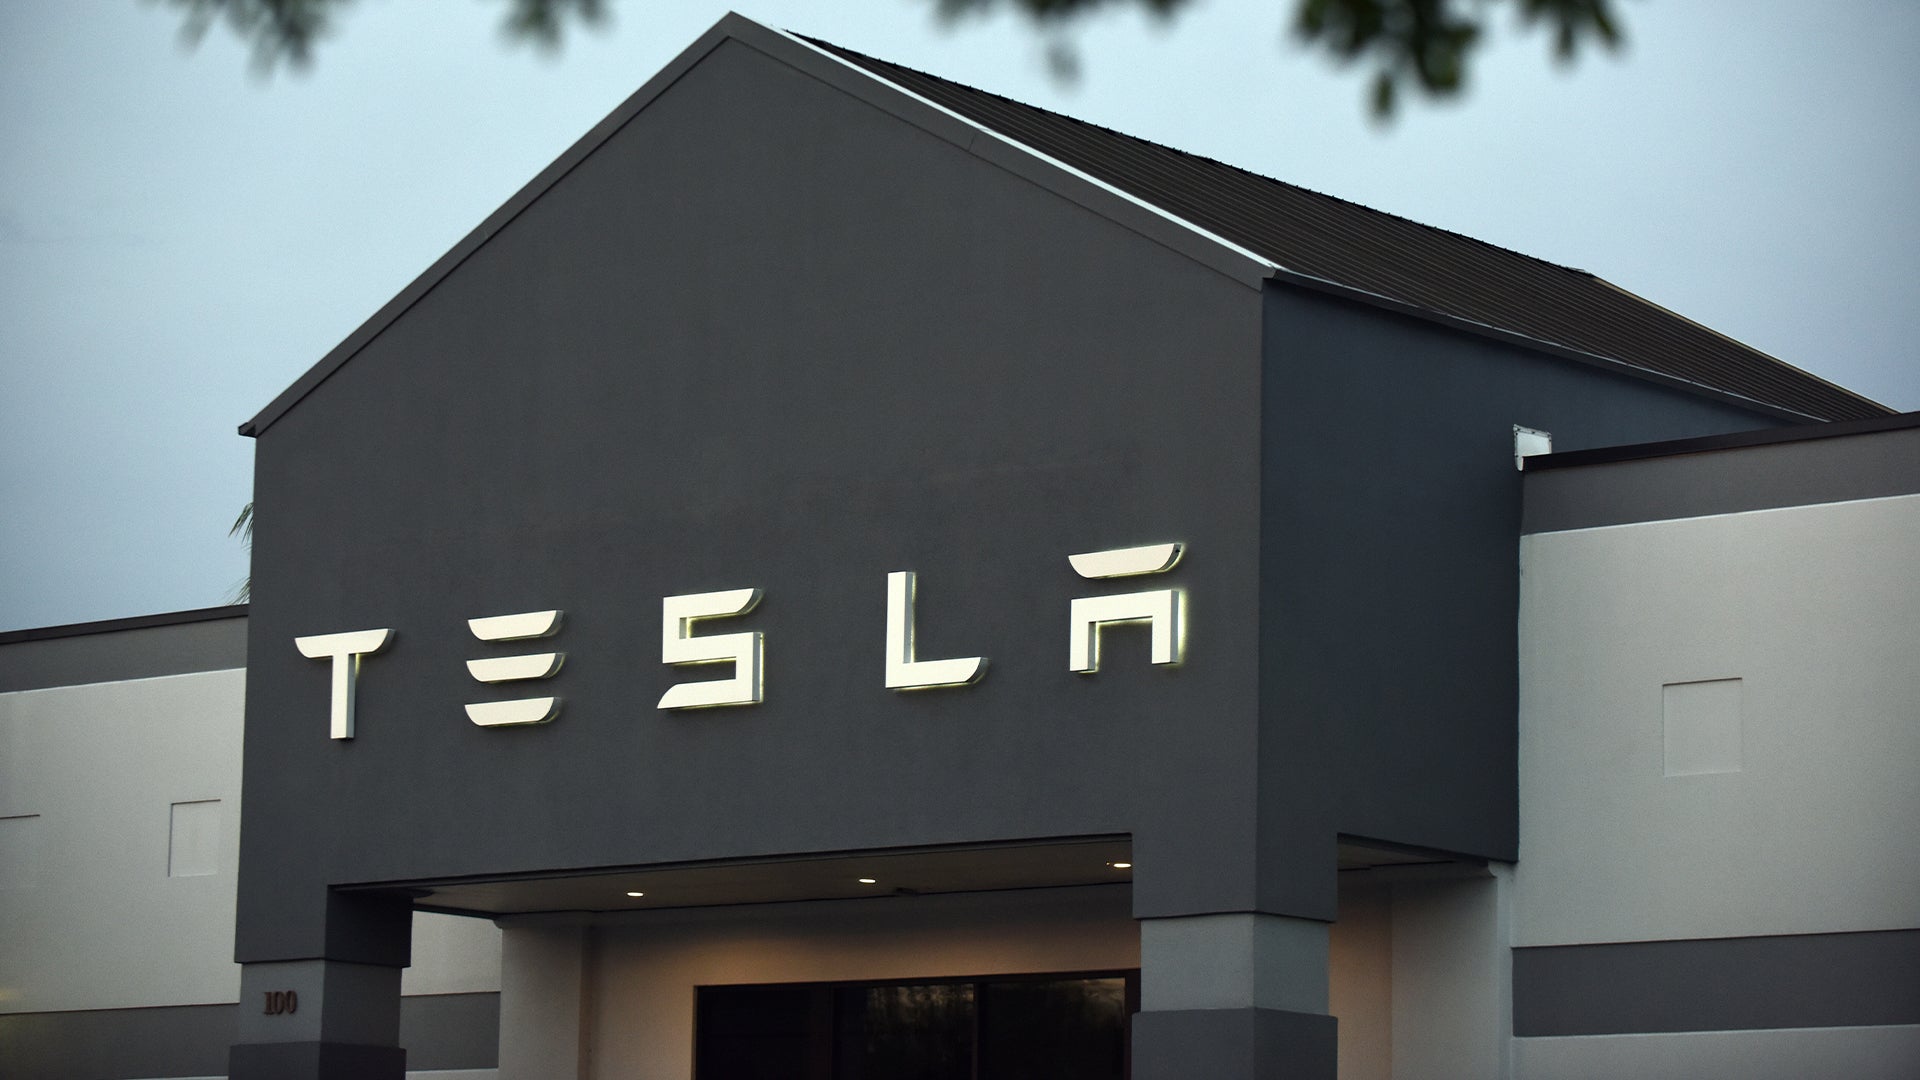 Tesla’s Found a Way Around Direct Sales Bans by Putting Dealerships on Tribal Lands